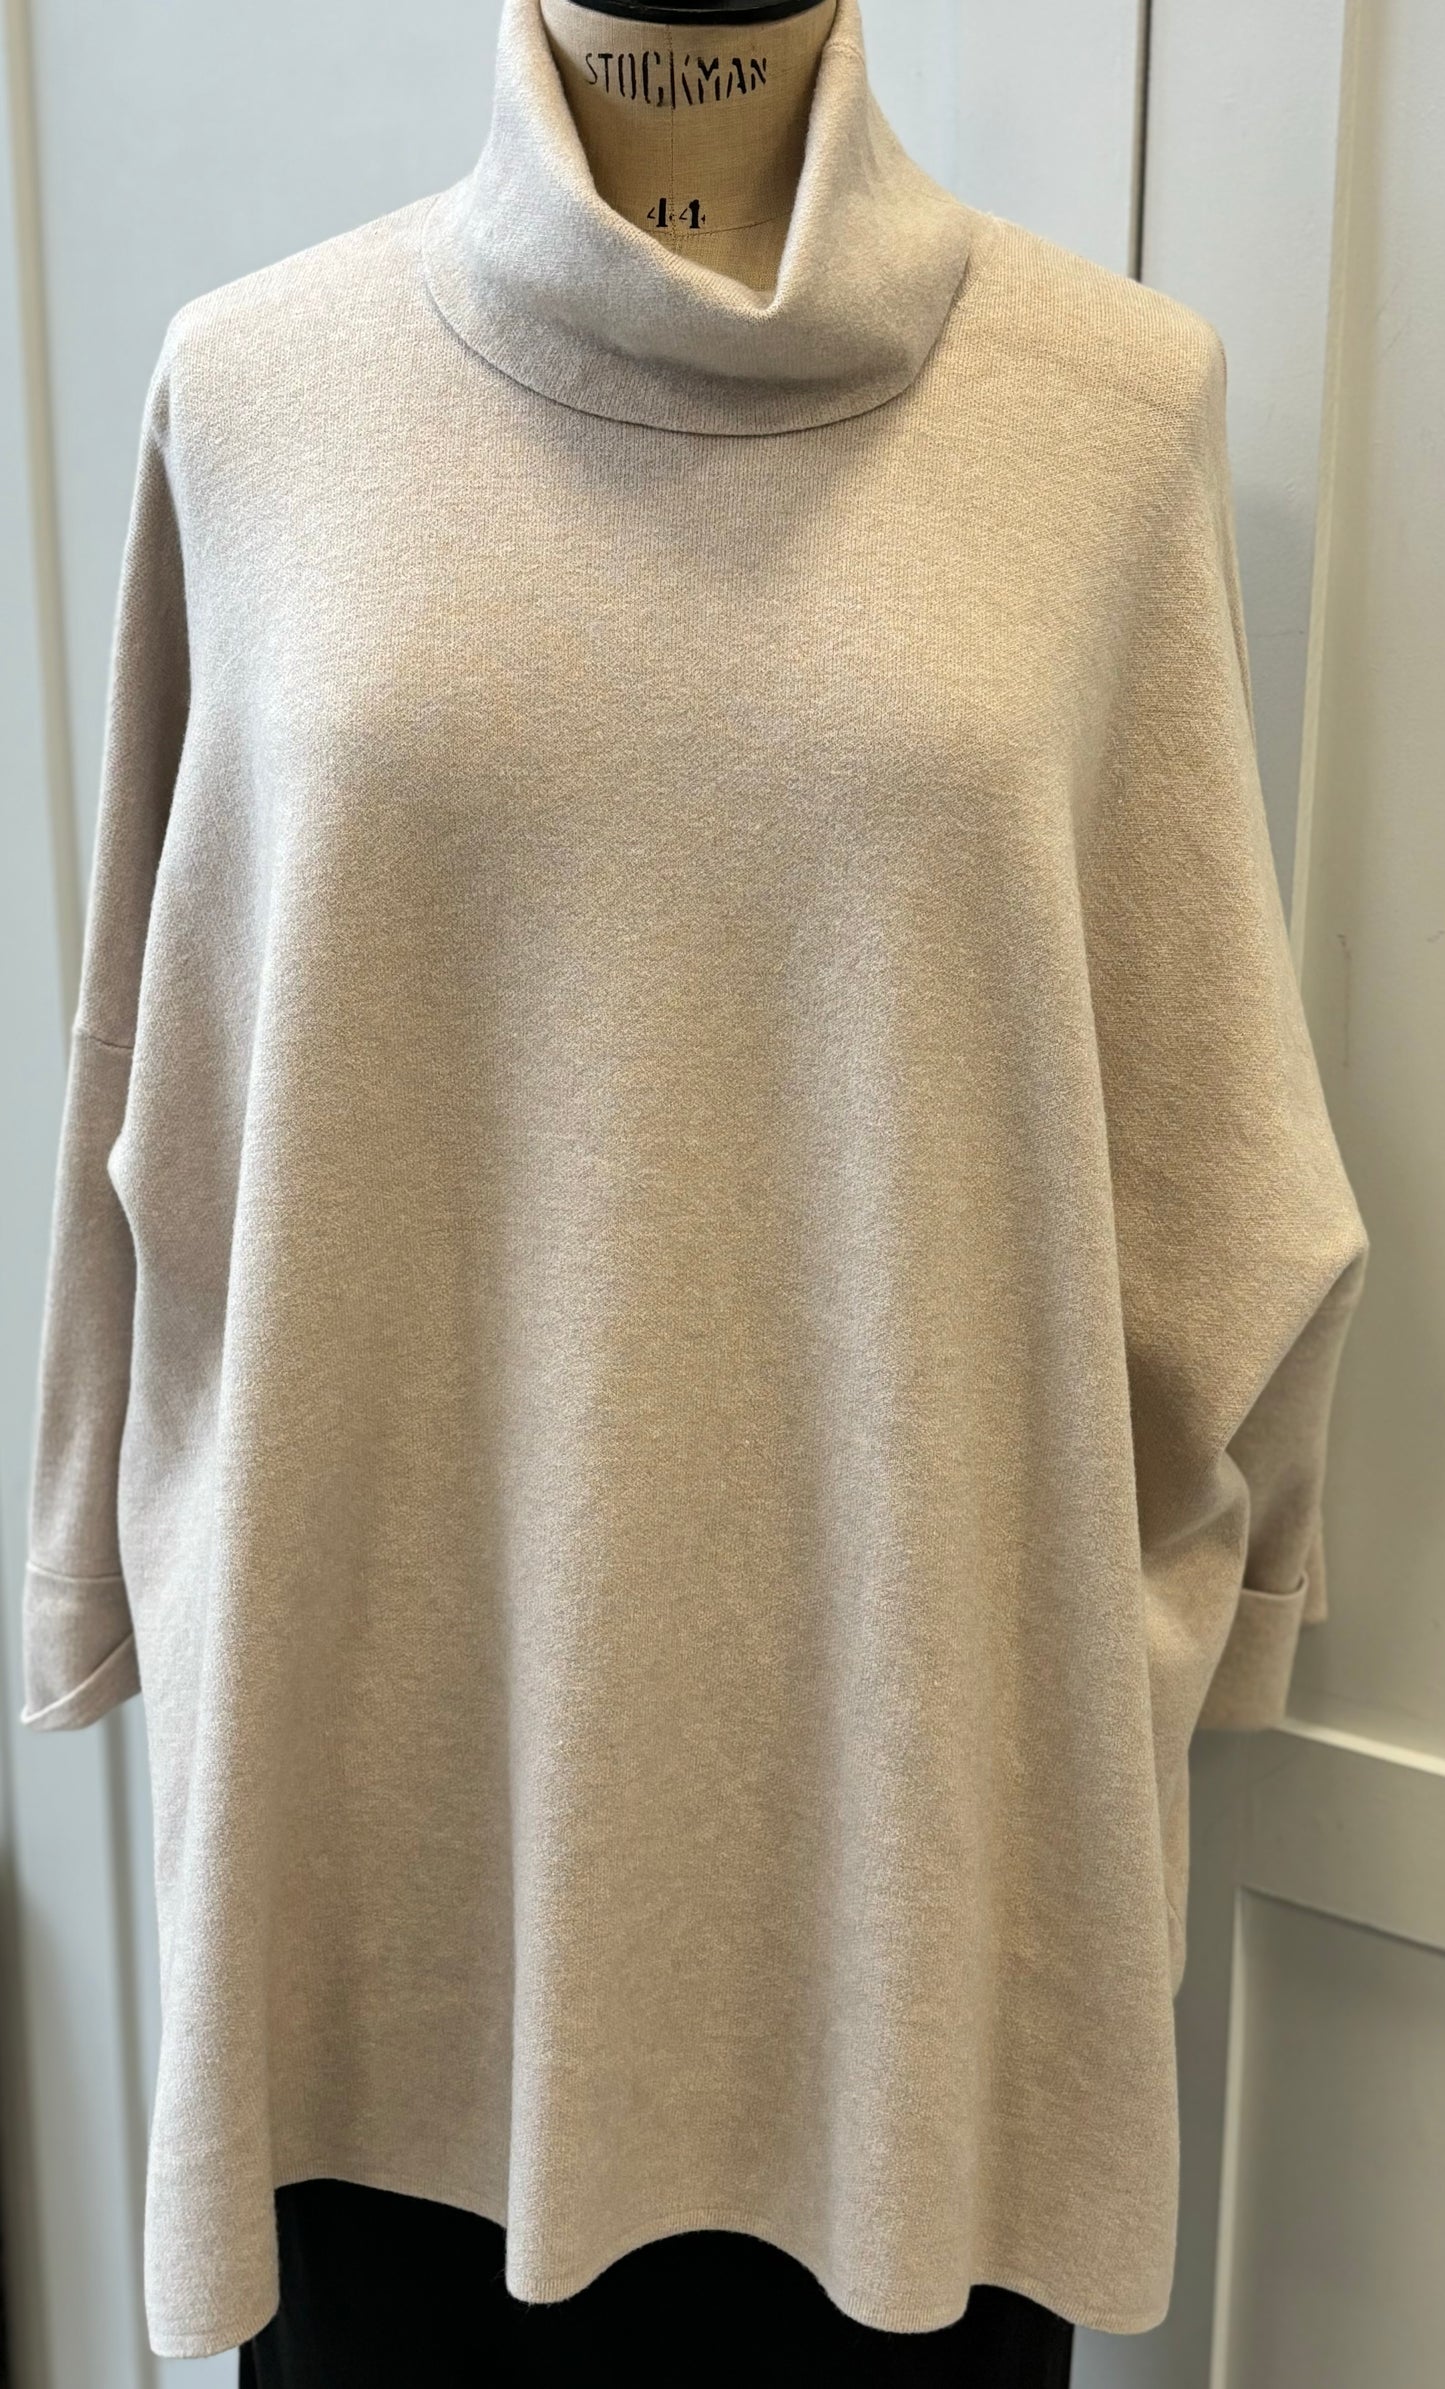 The Pam Cowl Neck Tunic Jumper